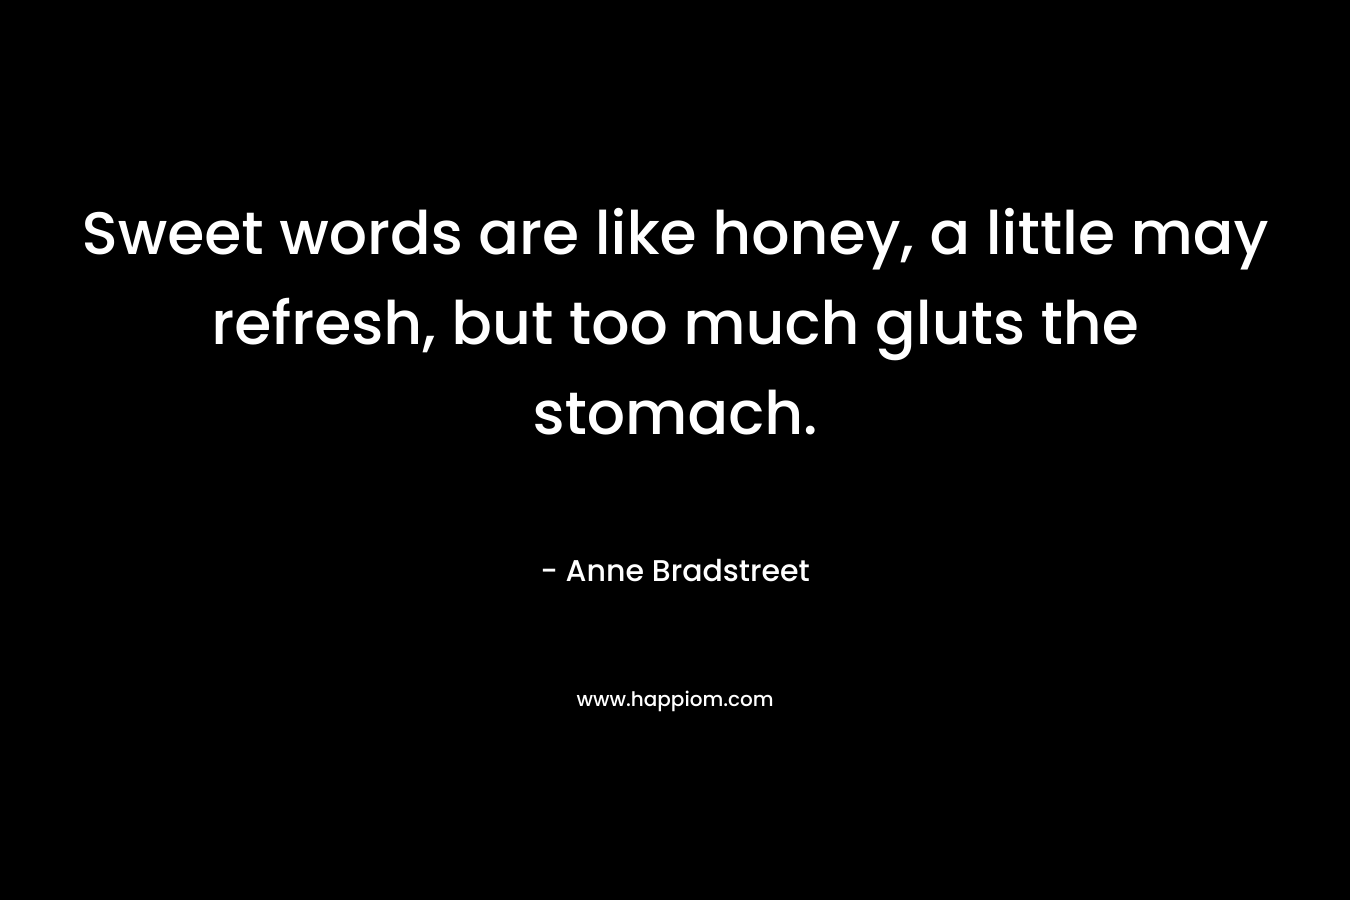 Sweet words are like honey, a little may refresh, but too much gluts the stomach.